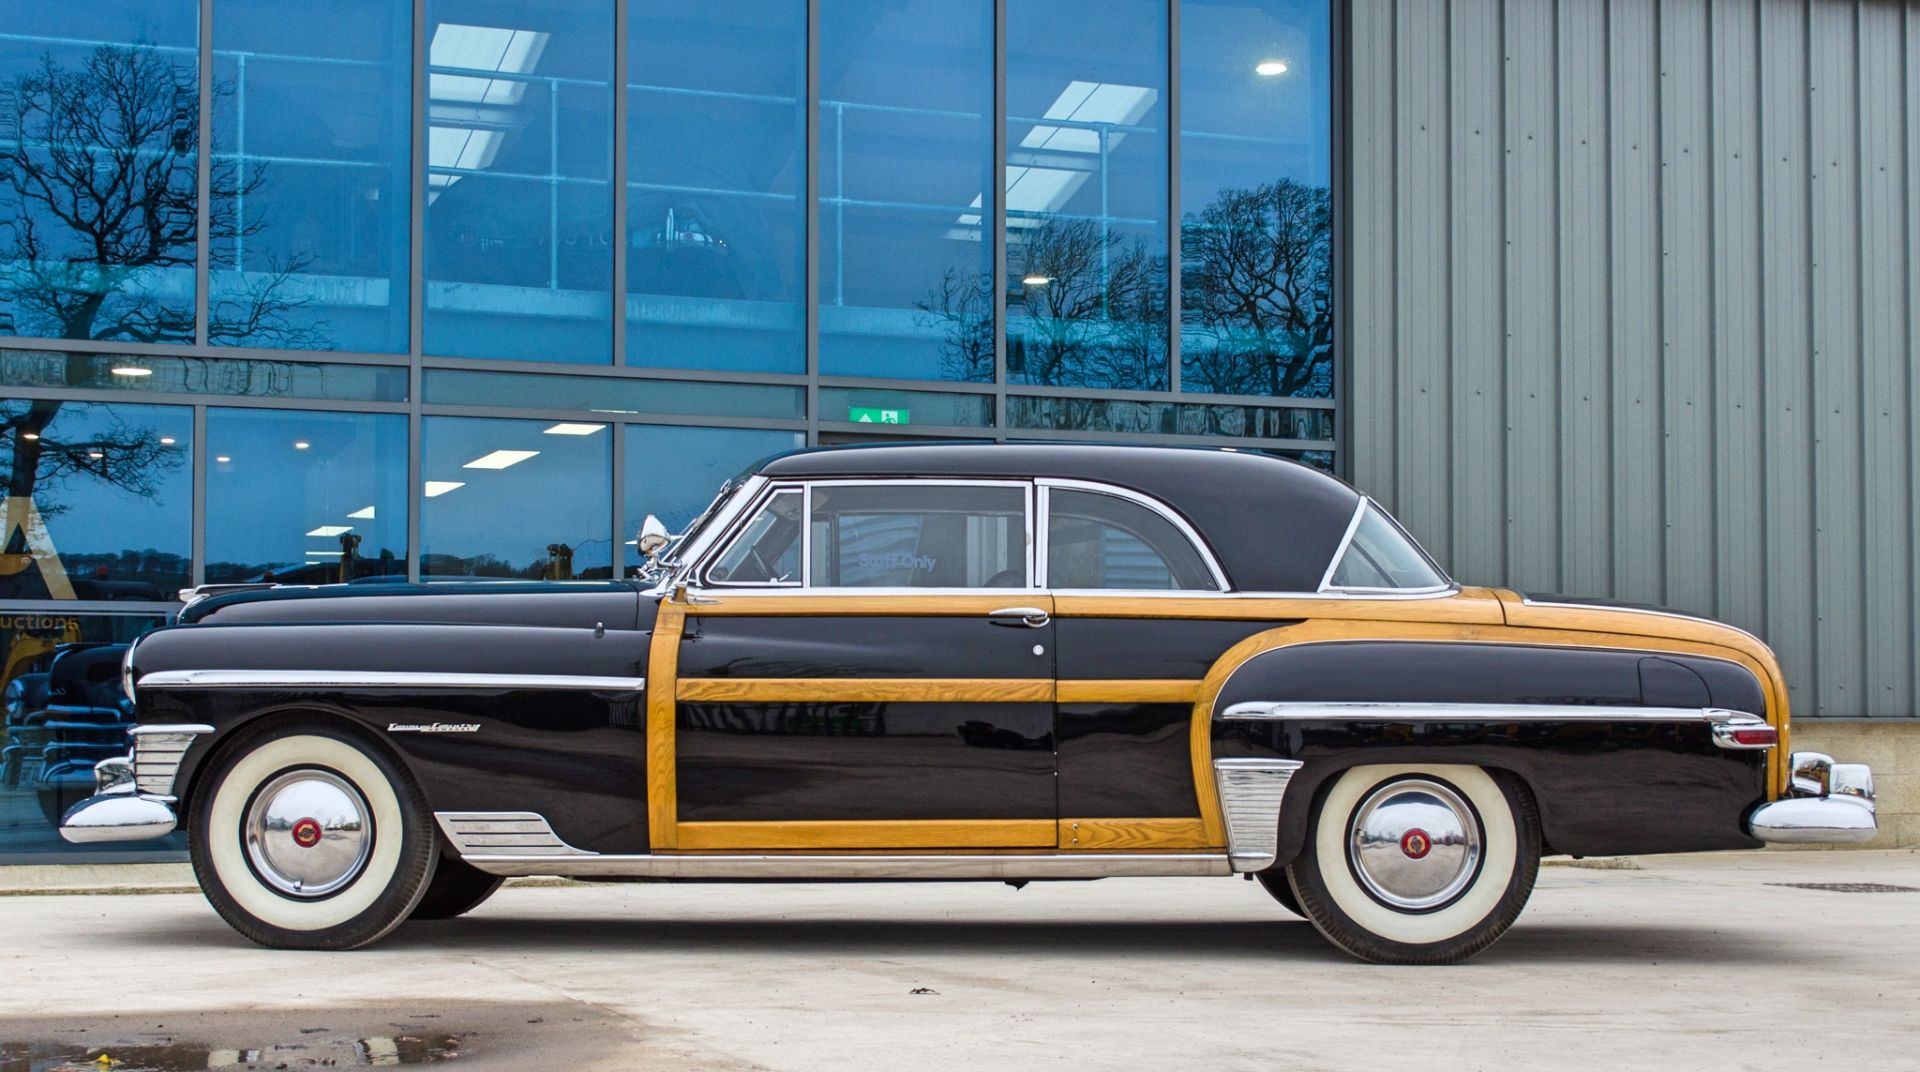 1950 Chrysler Newport Town and Country 5300cc 2 door Coupe - Image 15 of 62